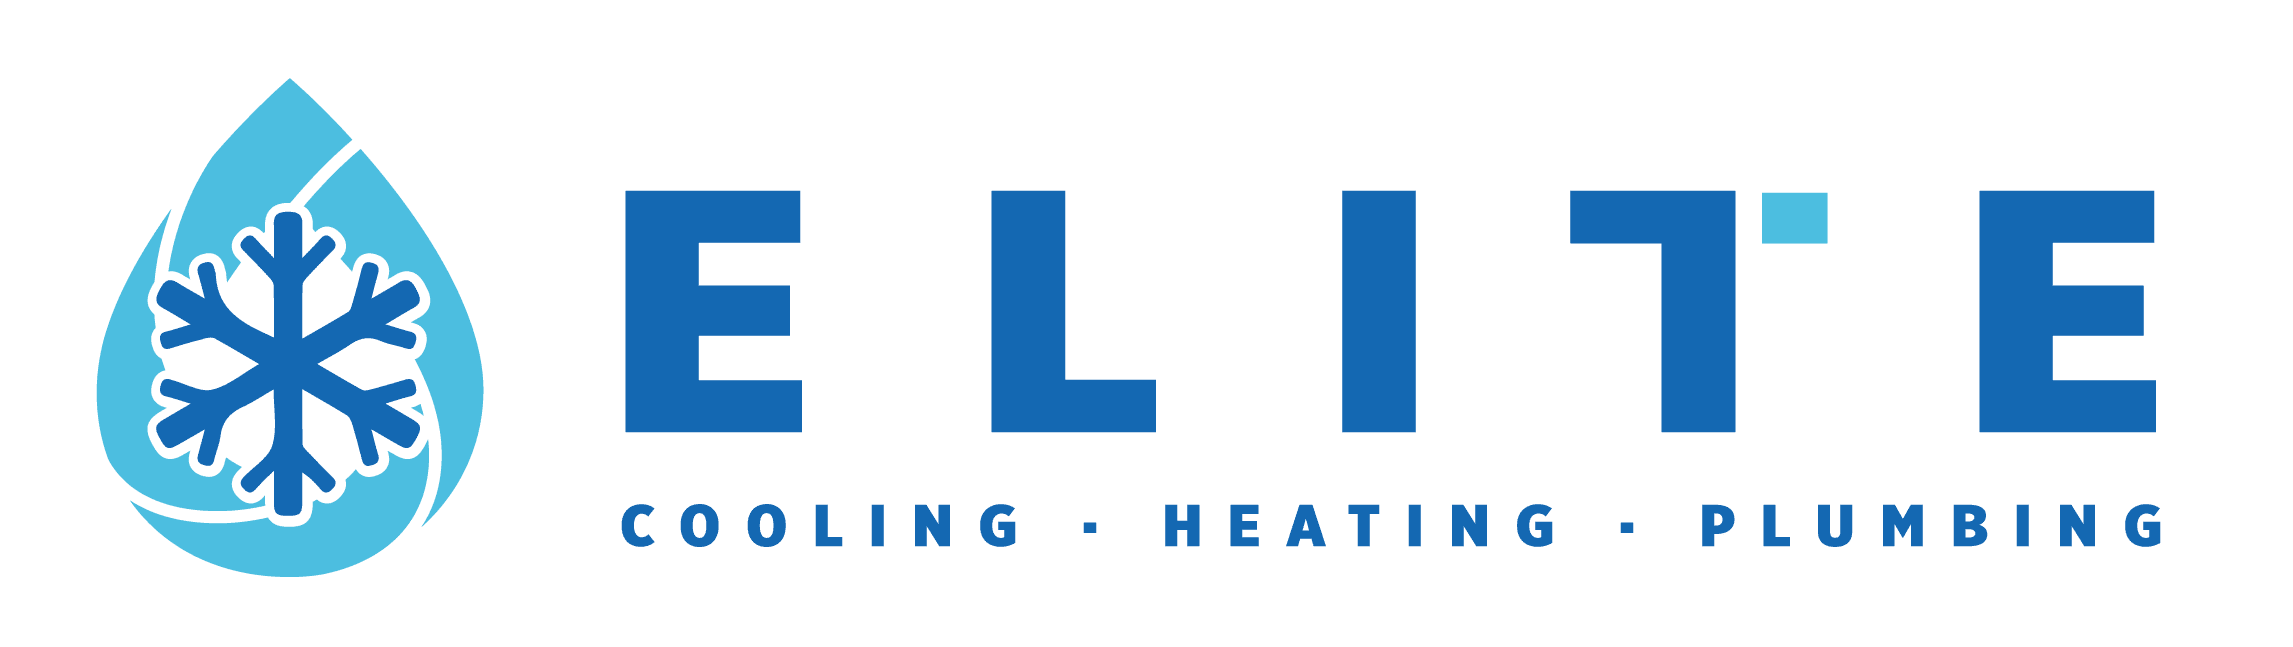 20% OFF PLUMBING REPAIRS & SERVICES | Elite Heating and Air